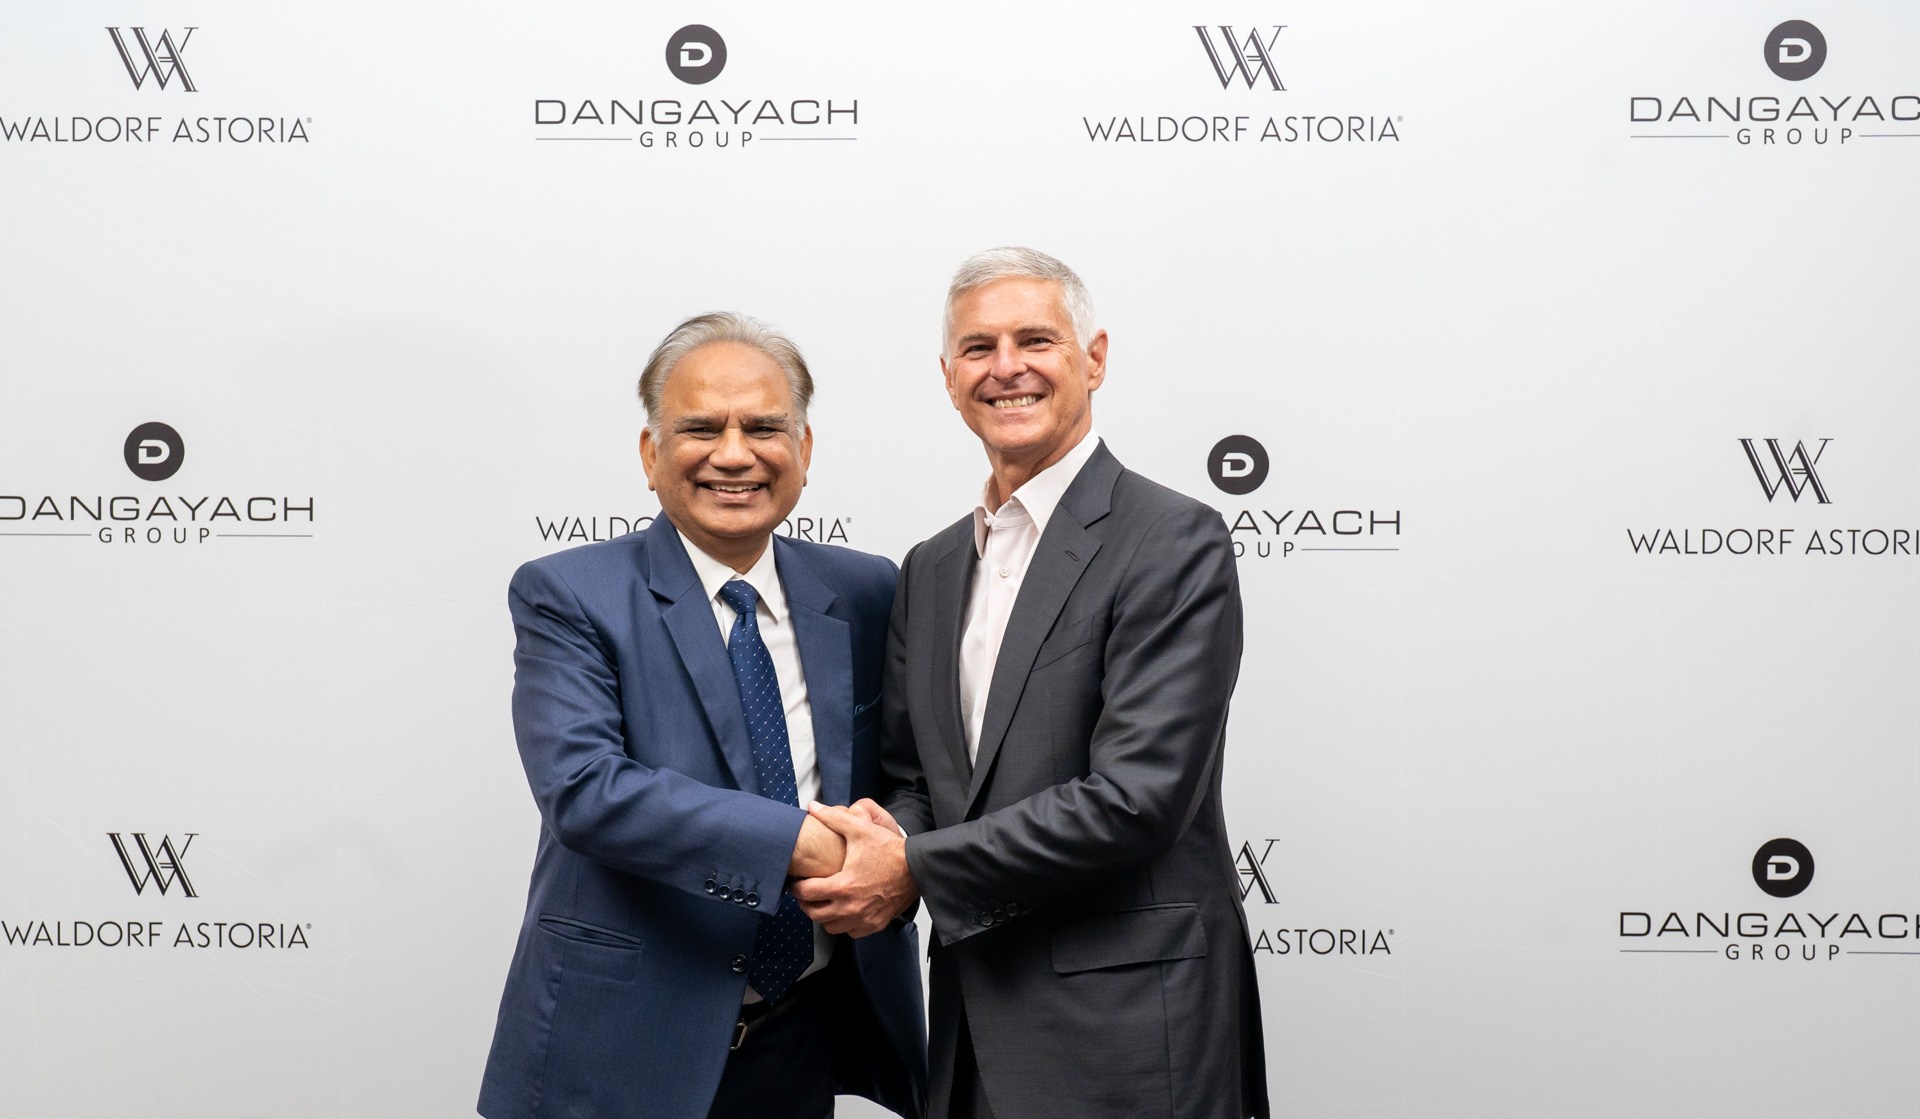 Signing of Waldorf Astoria Jaipur Left to Right - Hari Mohan Dangayach, chairman, Dangayach Group with Chris Nassetta, president & chief executive officer, Hilton